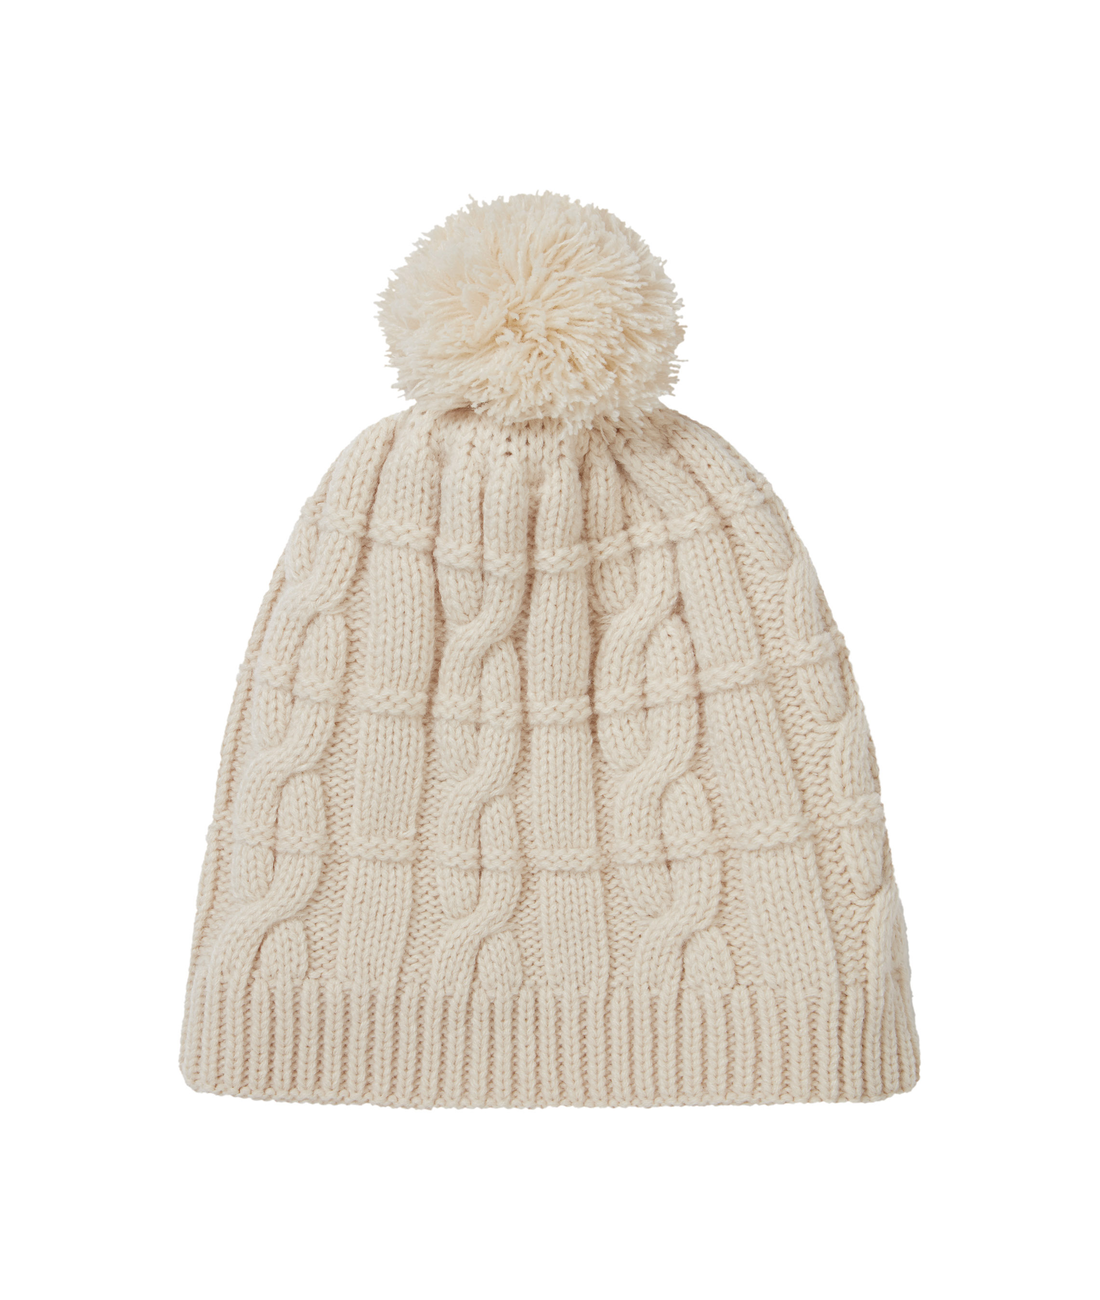 Hemsby - Waterproof Cold Weather Cable Knit Bobble Hat